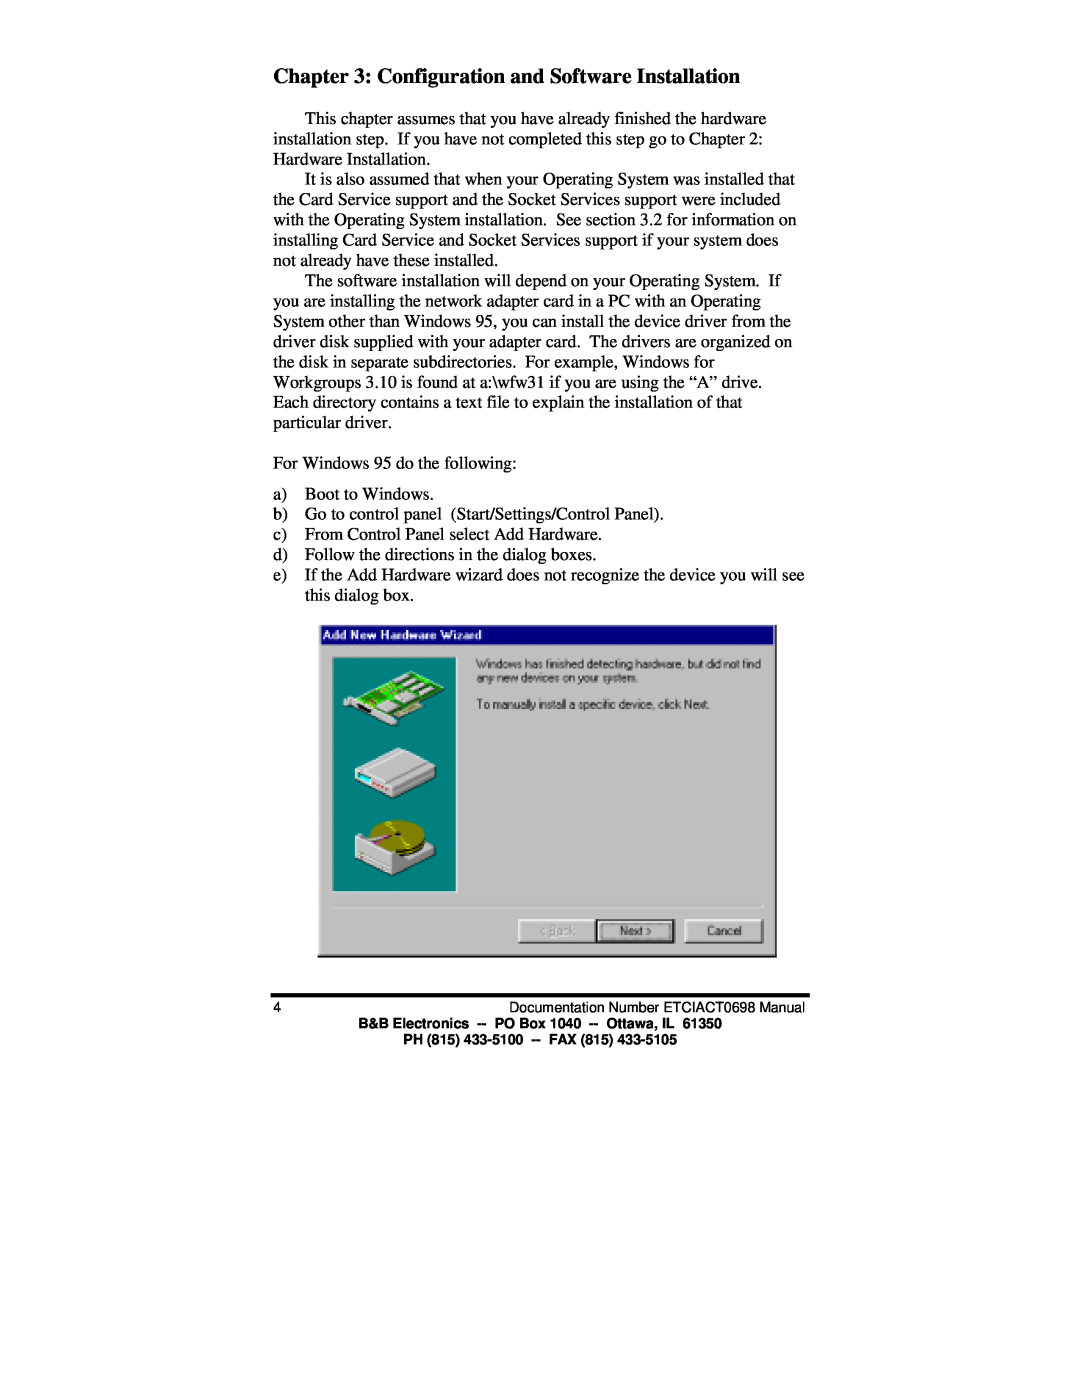 B&B Electronics ETCIACT manual Configuration and Software Installation 